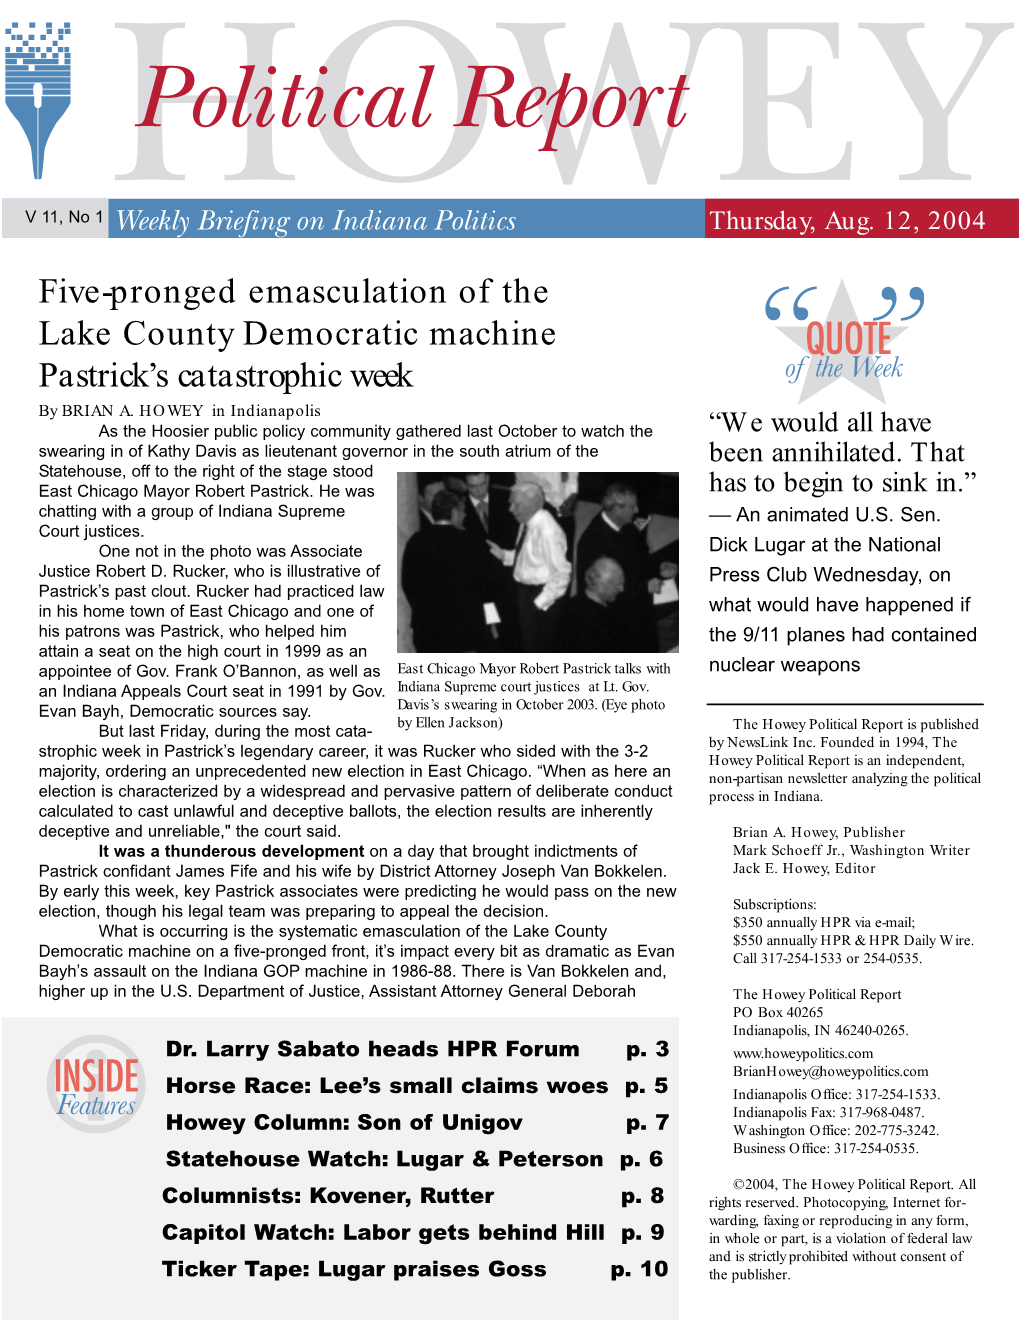 Five-Pronged Emasculation of the Lake County Democratic Machine Pastrick’S Catastrophic Week by BRIAN A